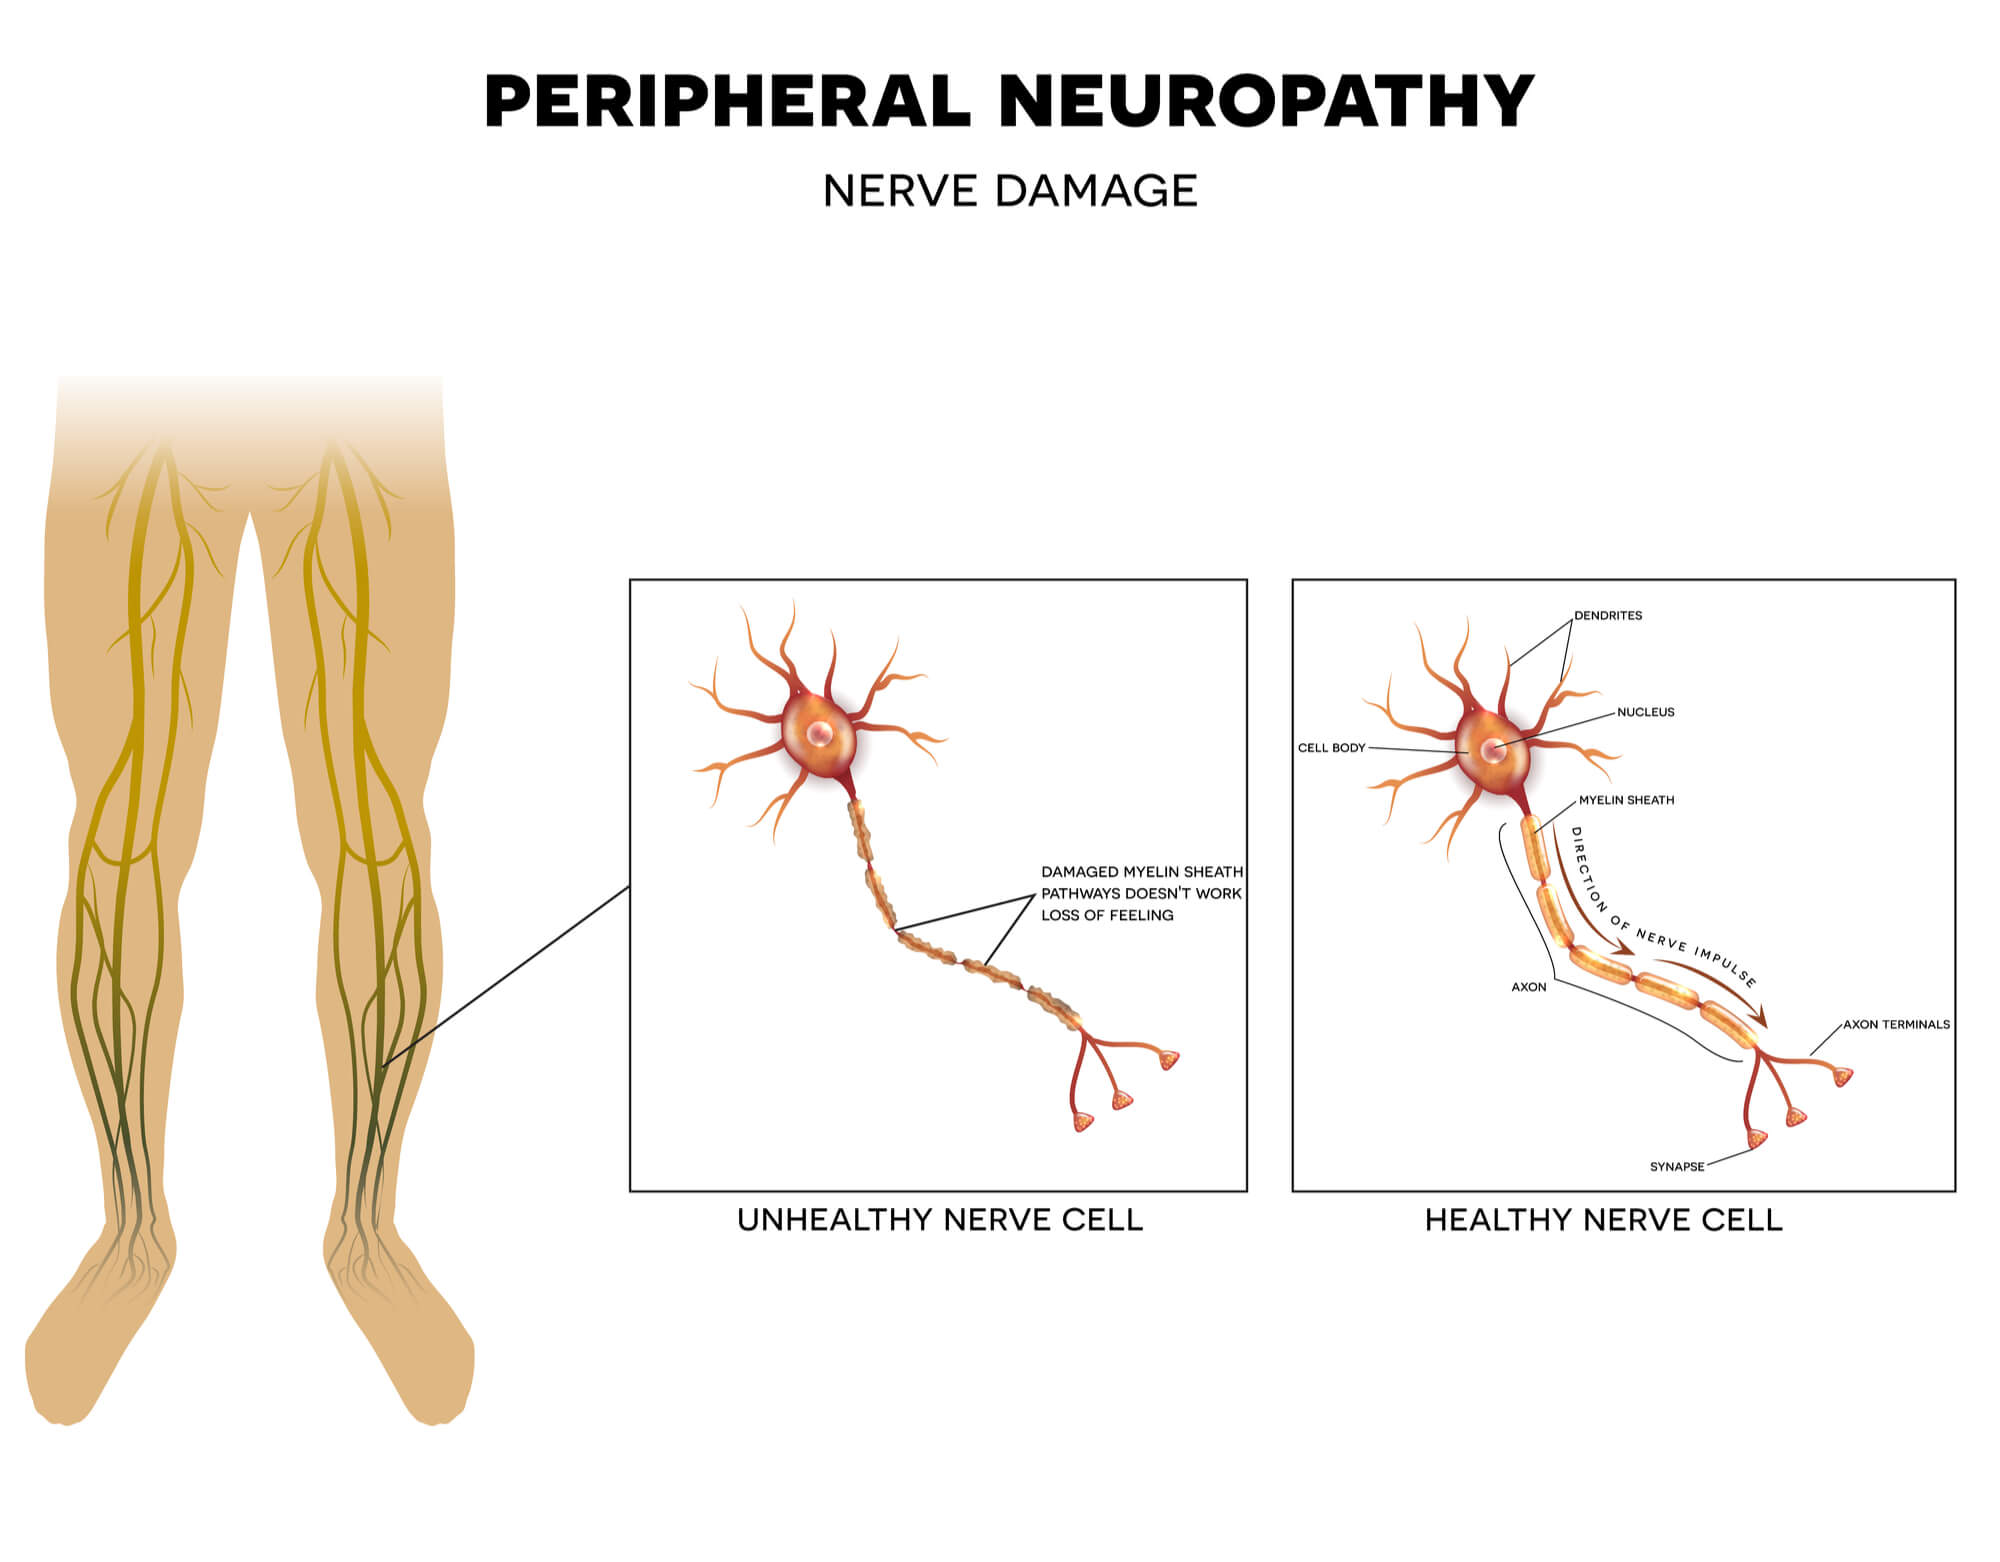 Peripheral Neuropathy is Life Threating